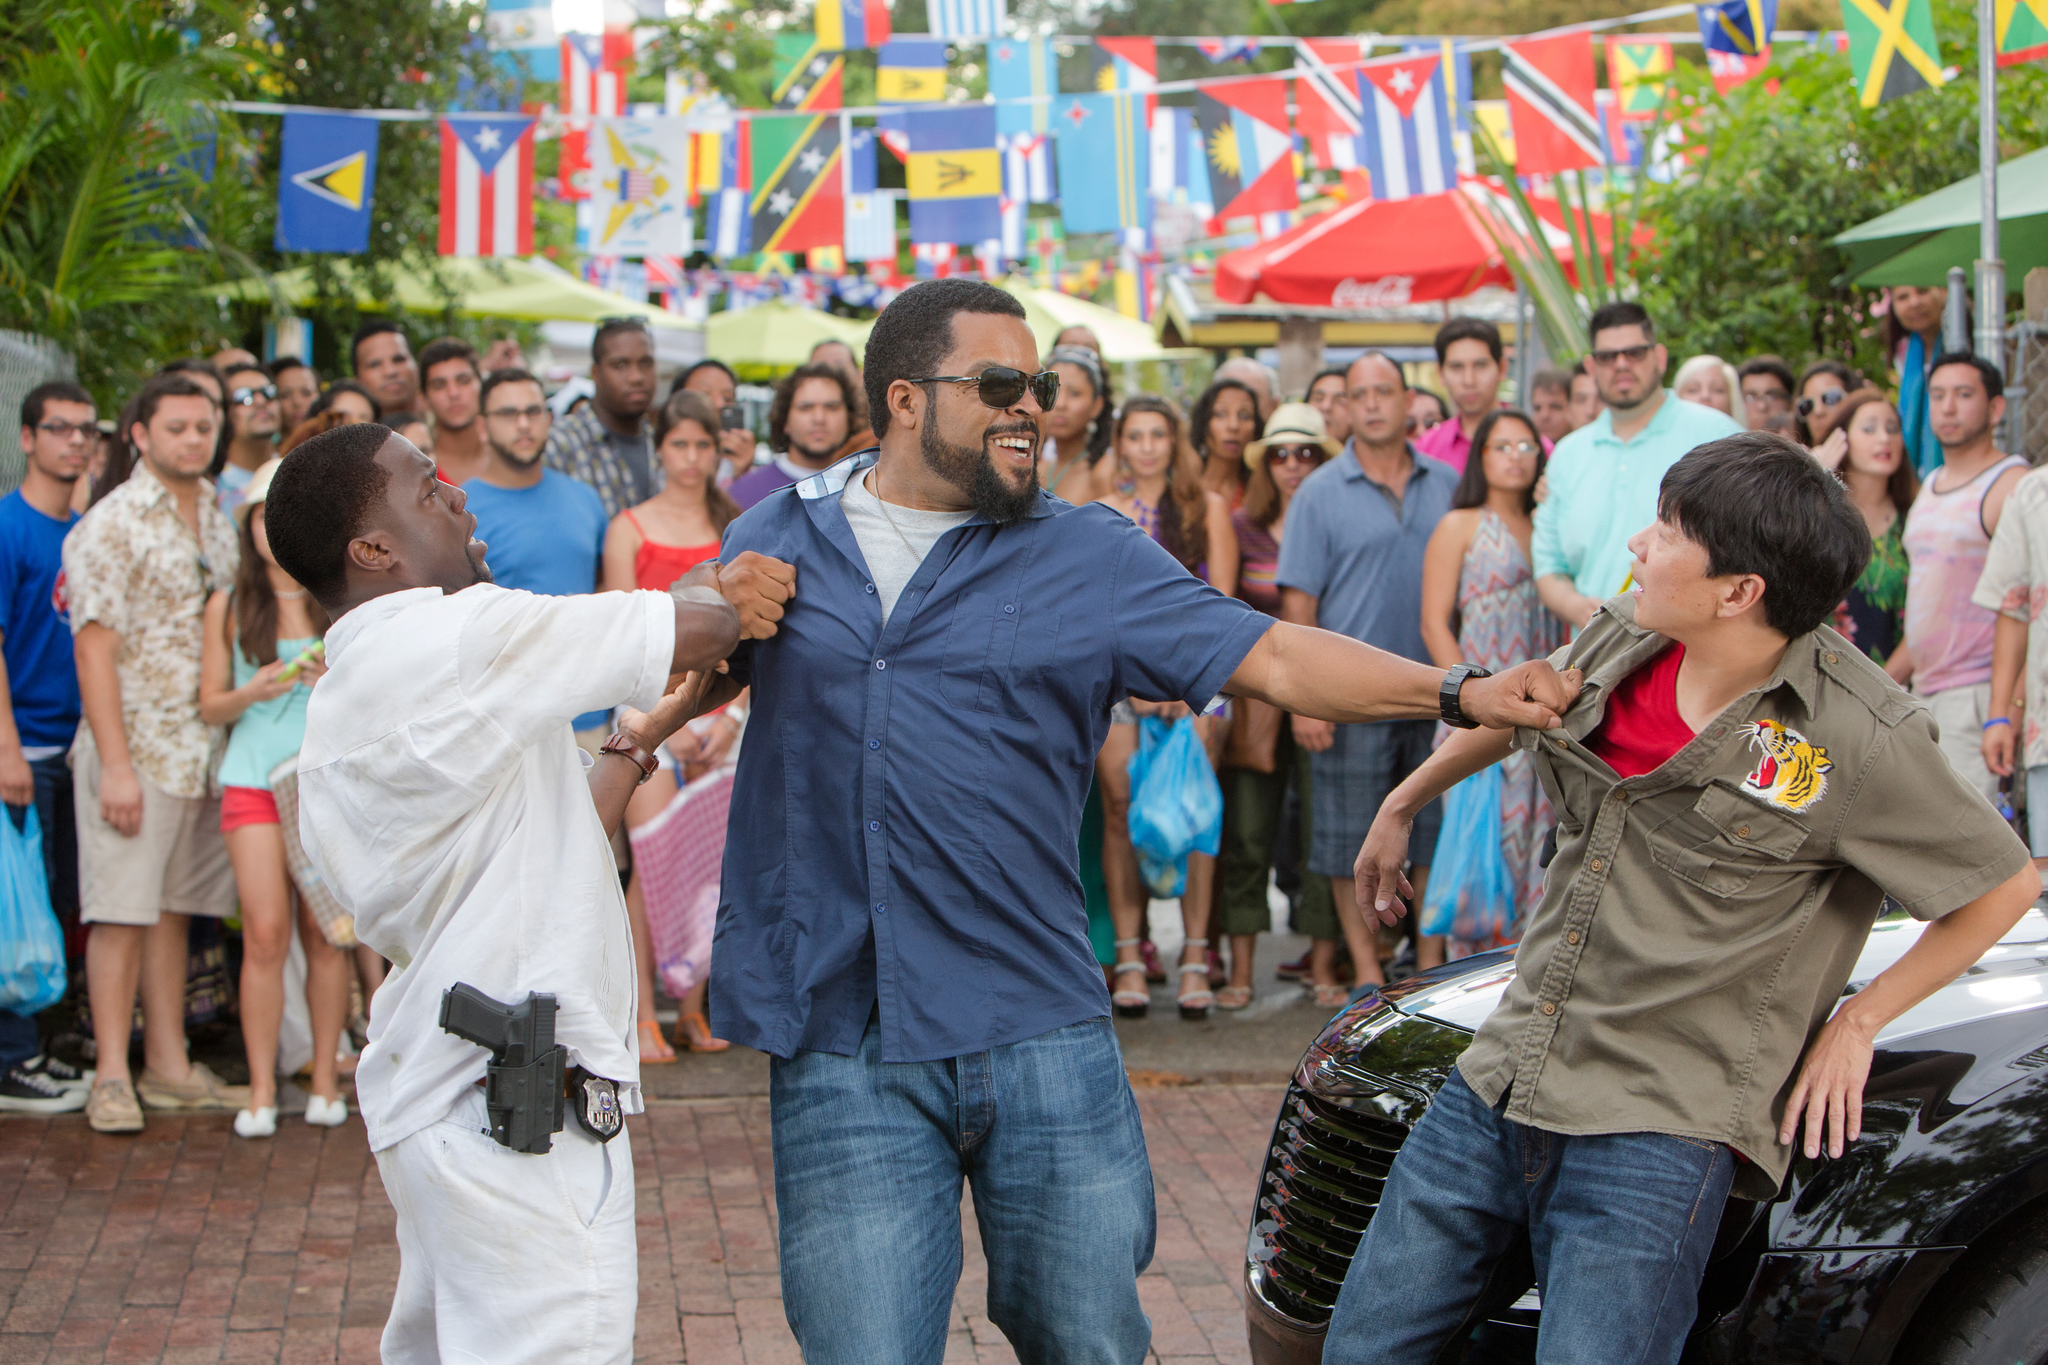 Still of Ice Cube, Kevin Hart and Ken Jeong in Ride Along 2 (2016)